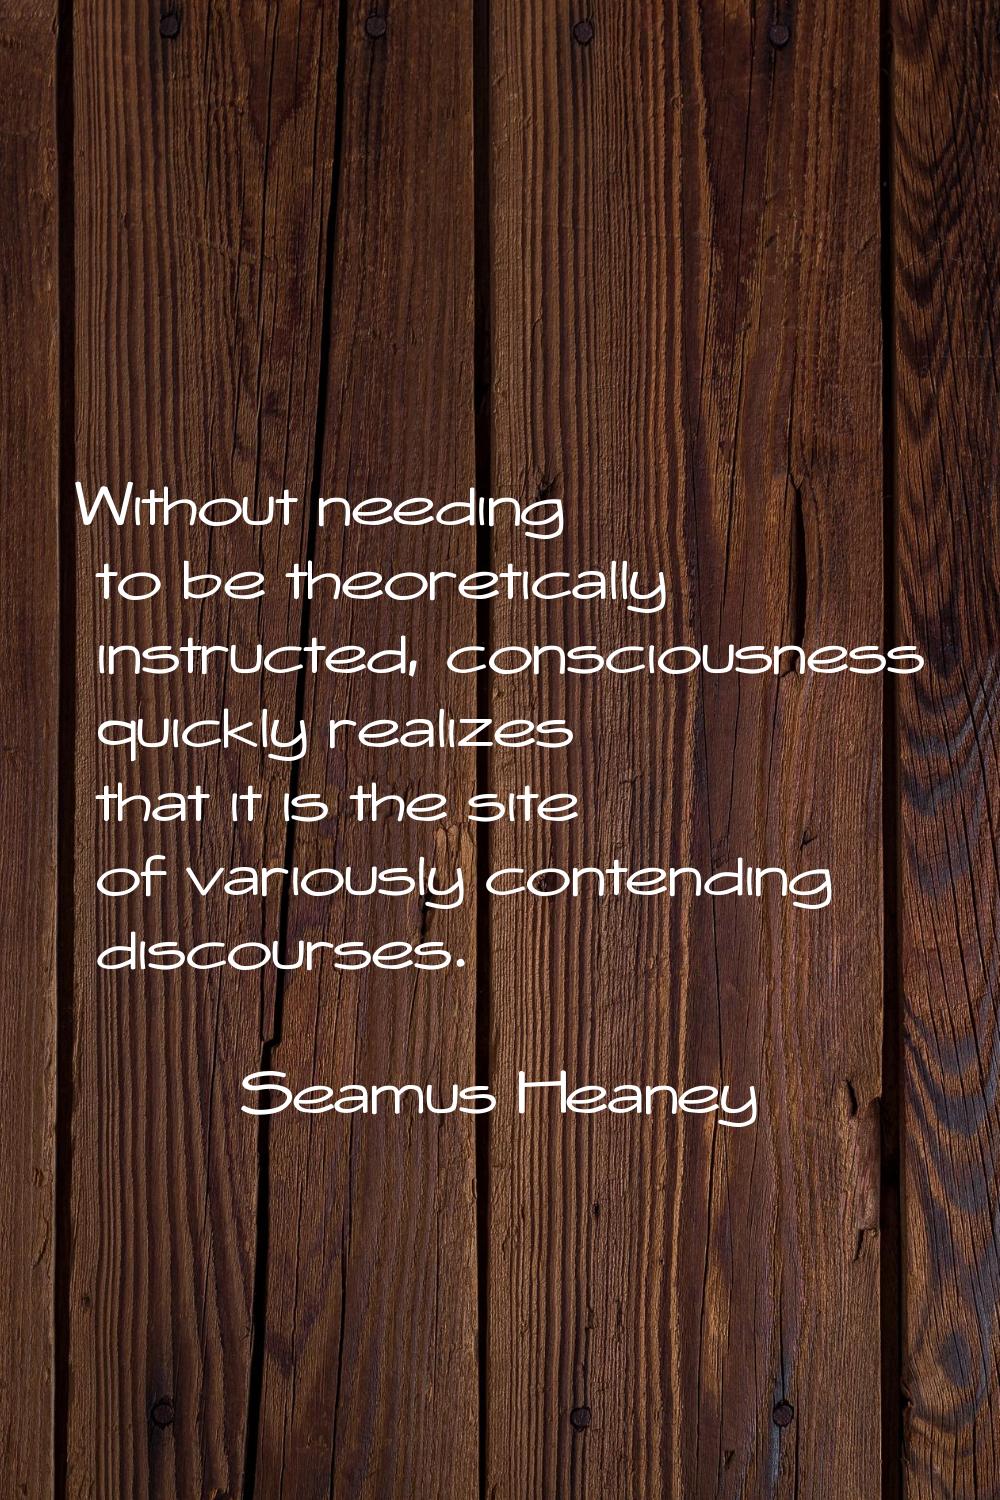 Without needing to be theoretically instructed, consciousness quickly realizes that it is the site 